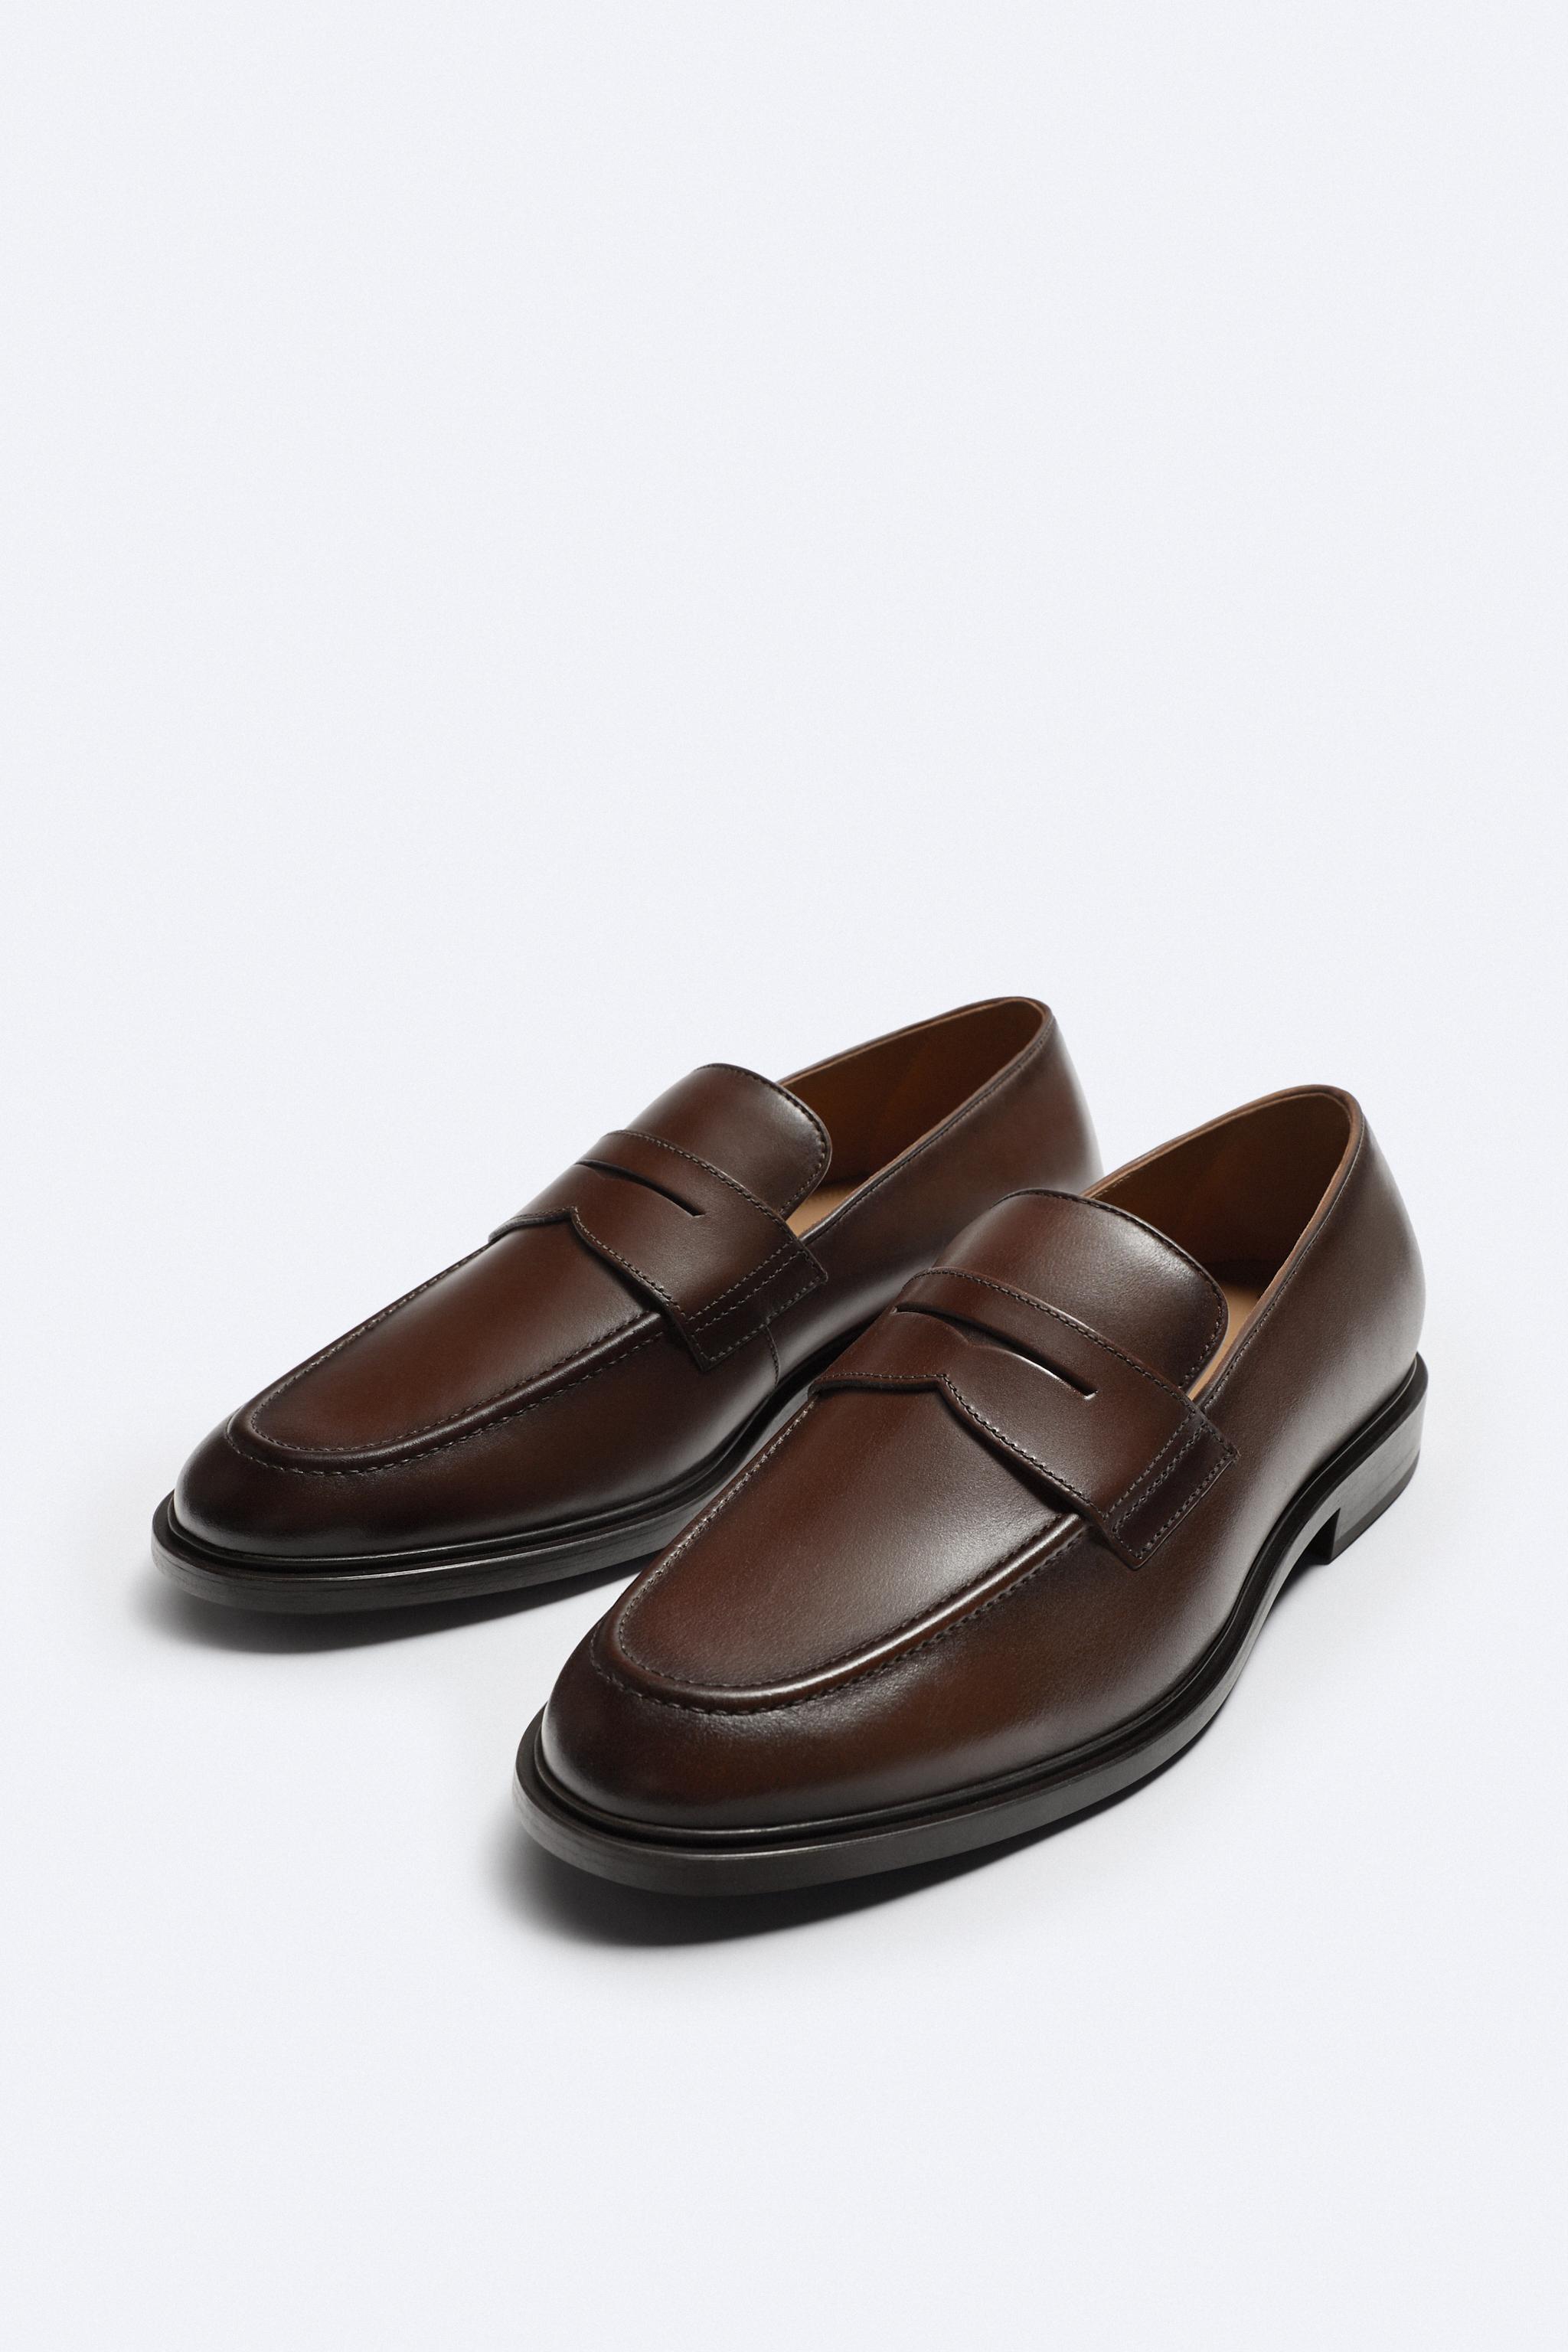 LEATHER PENNY LOAFERS - Brown